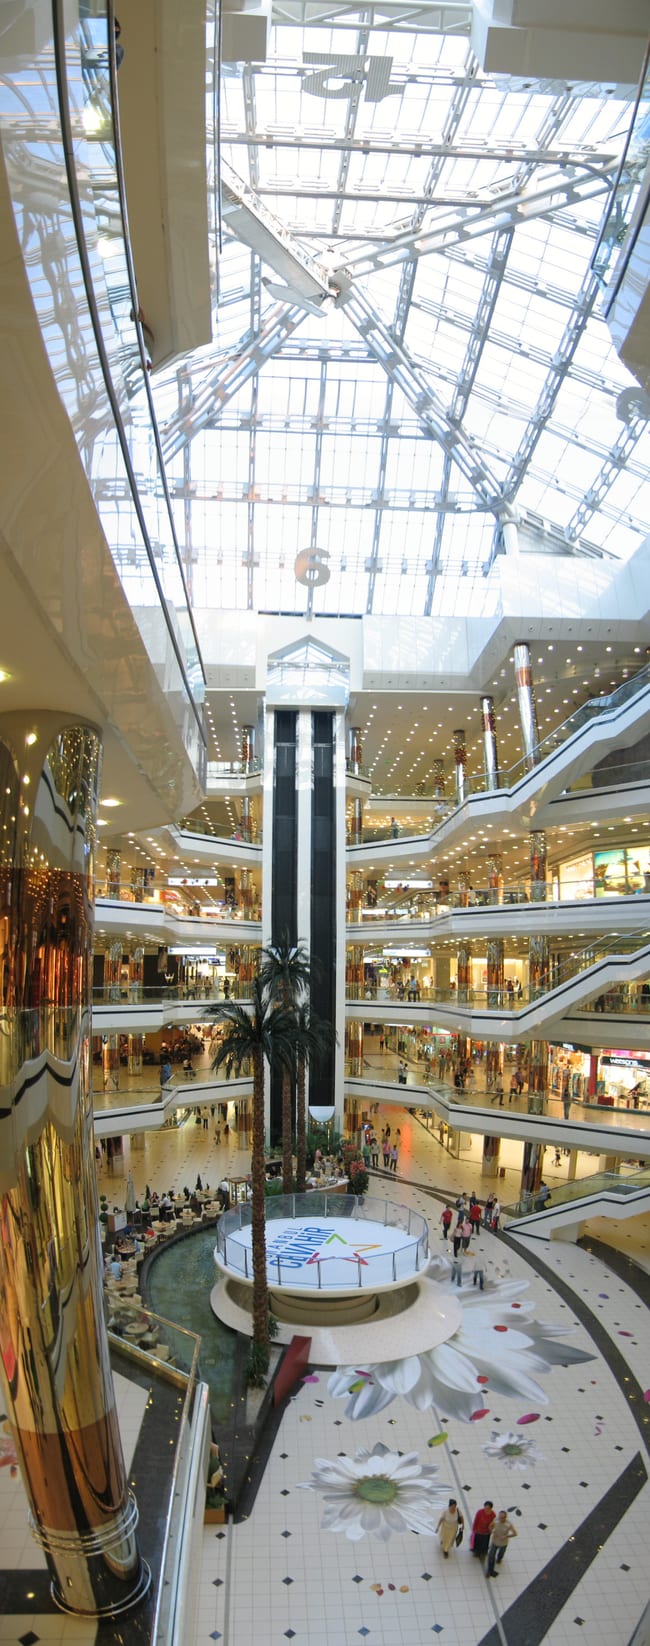 Business and Shopping in Sisli